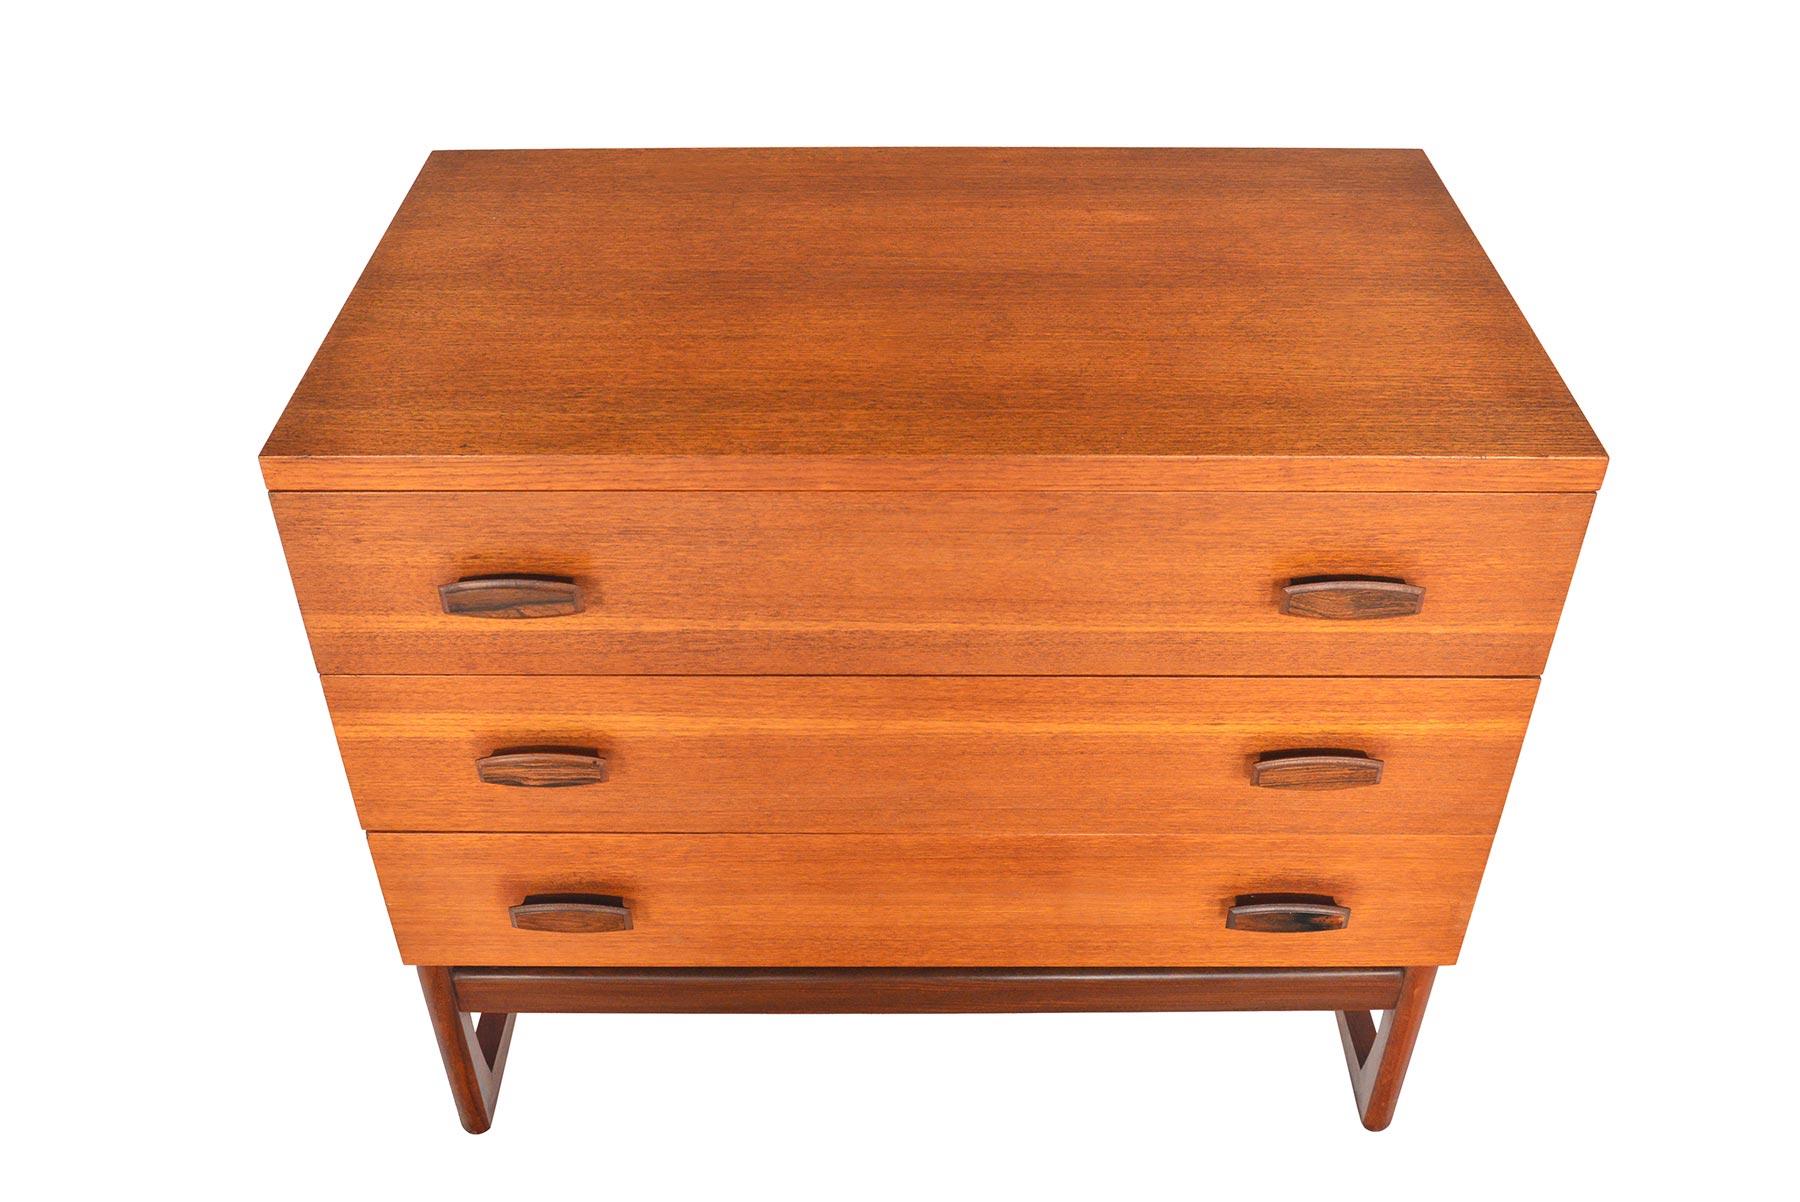 This English modern G Plan Quadrille range three drawer gentleman's chest was designed by R. Bennett in 1965. This fantastic piece features three deep drawers adorned with carved afrormosia pulls. Case stands on the Quadrille range's signature